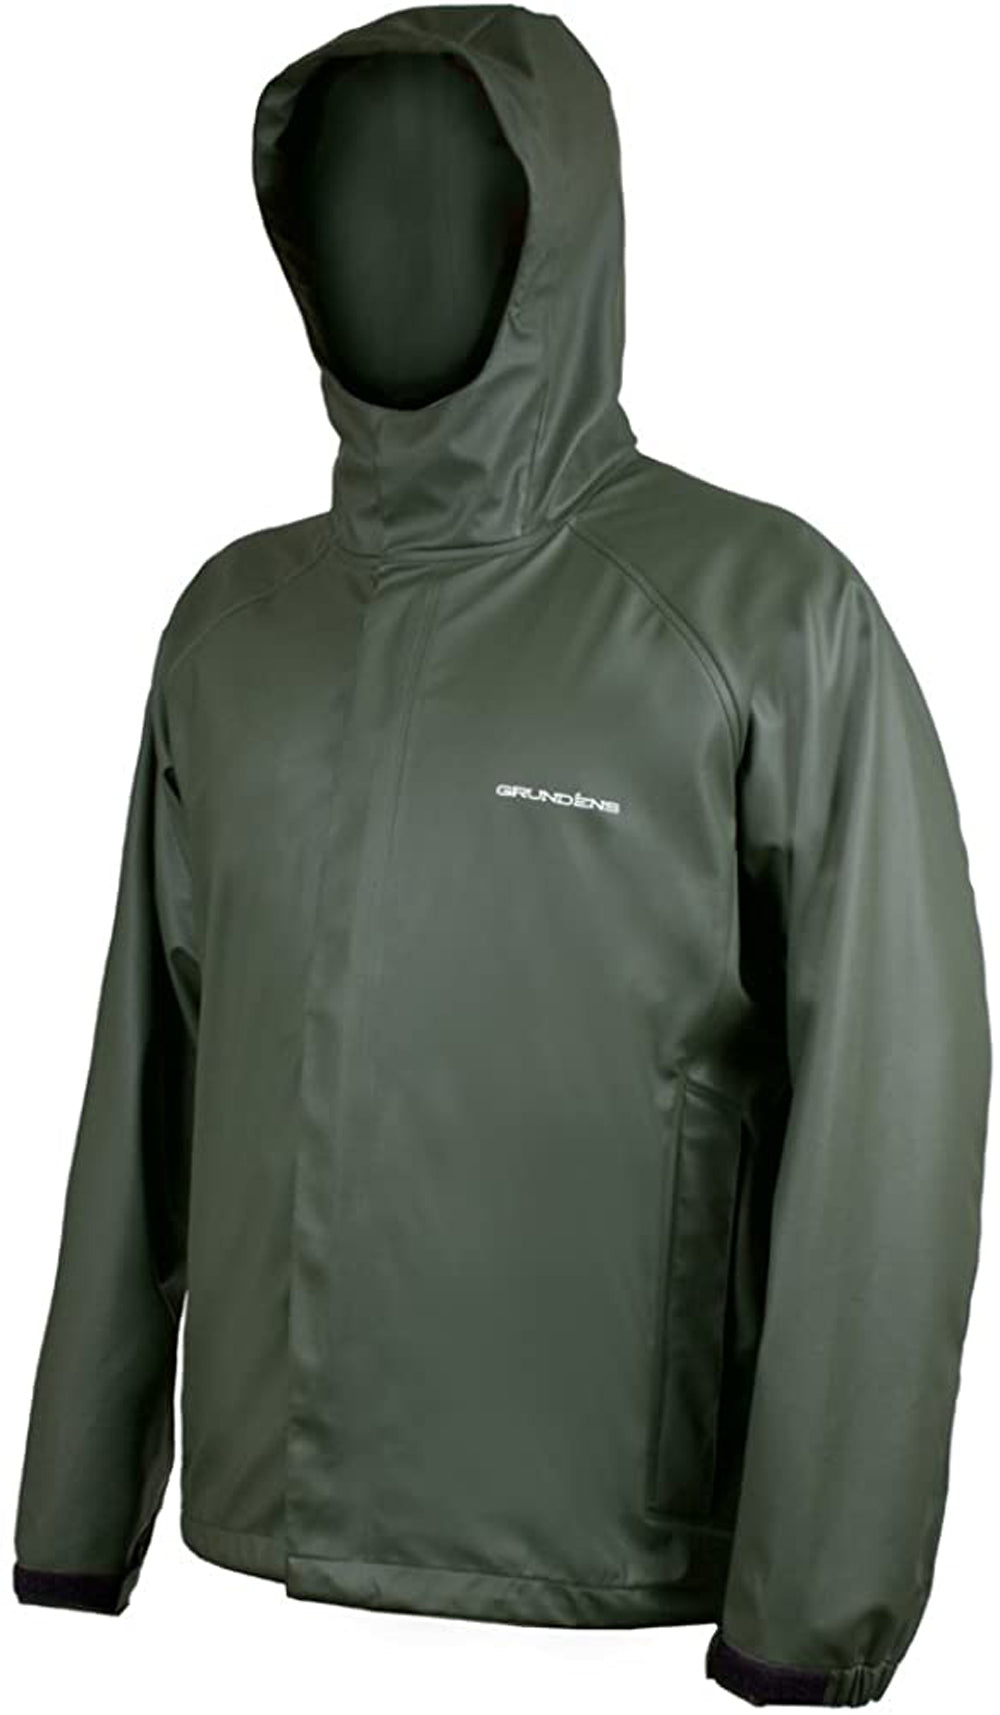 Neptune Jacket in Green color from the front view